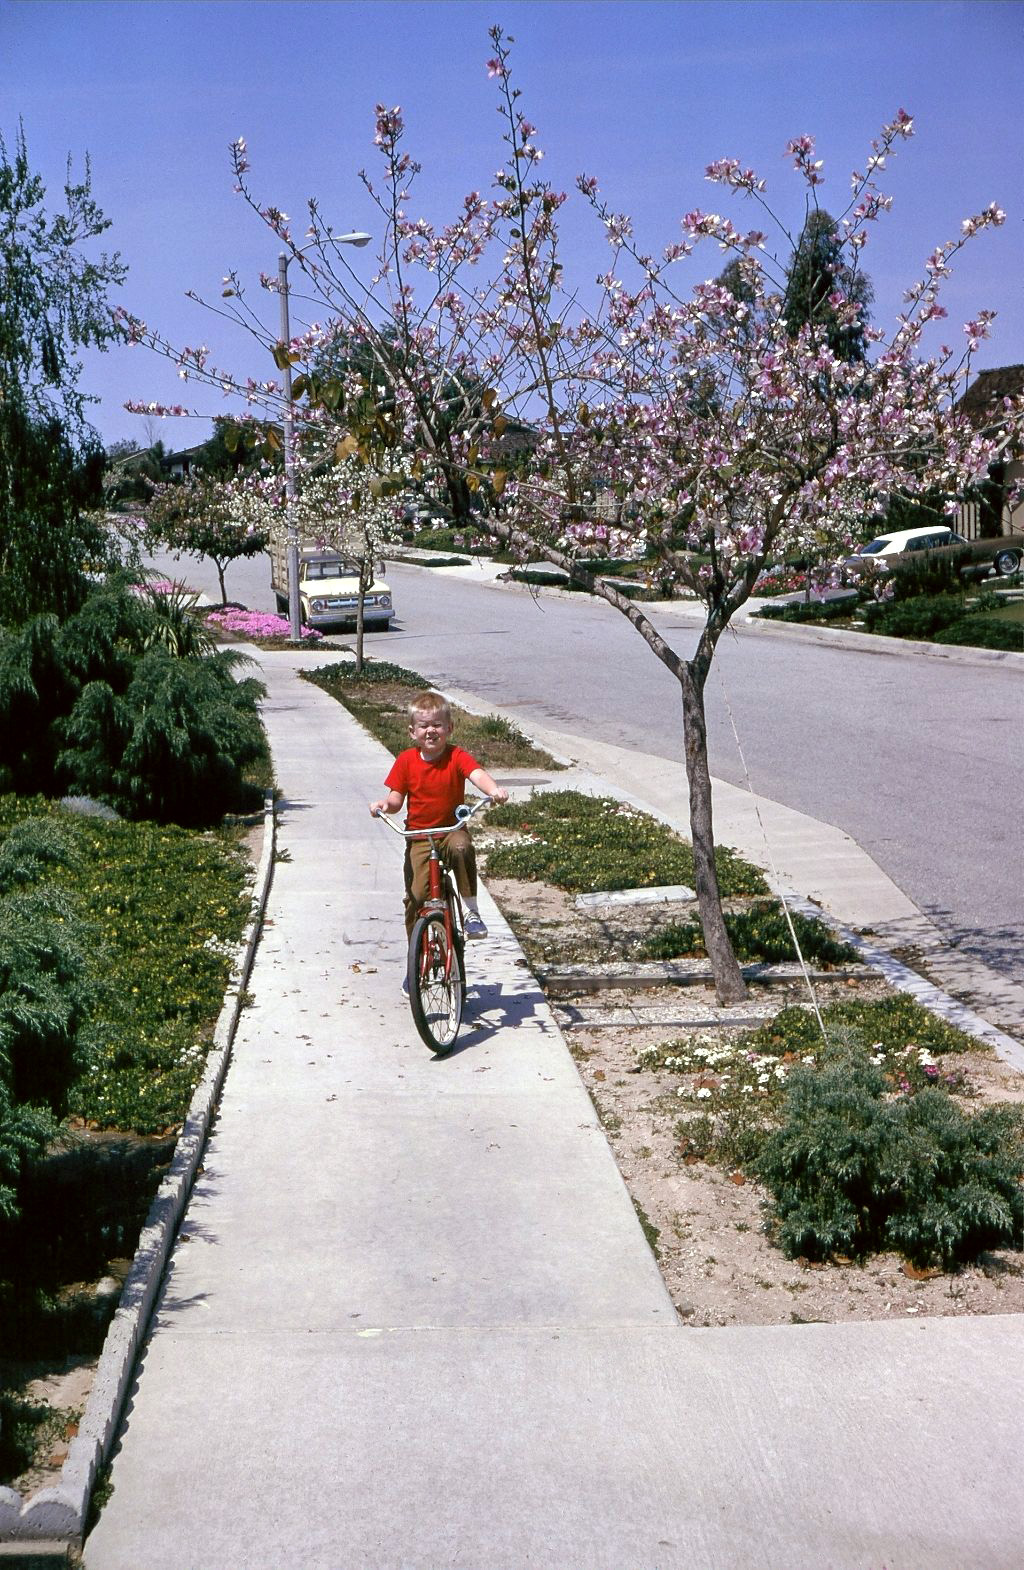 My younger brother, riding his new bike. Our street was a cul-de-sac in Walnut, California. This was probably around 1968. It was a good place for kids to explore the nearby hills. We learned to ride bikes, spend weekend mornings hiking the hills, and staying away from our parents. On our little street, things were mostly like they were in so-called "the good old days." View full size.